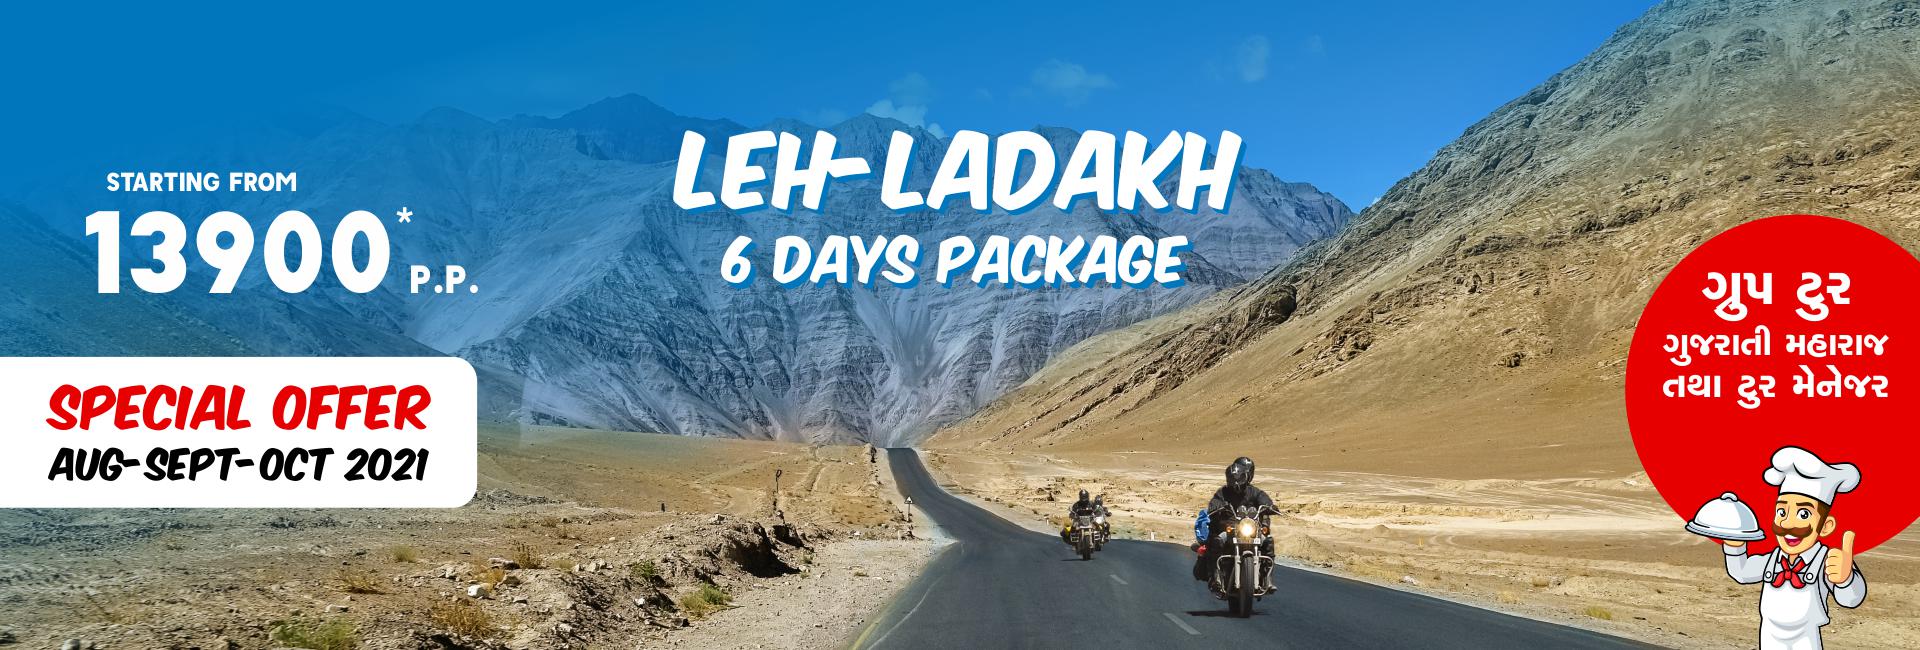 Book Leh Ladakh Tour Packages â€“ Ajay Modi TravelsTour and TravelsTravel AgentsAll Indiaother